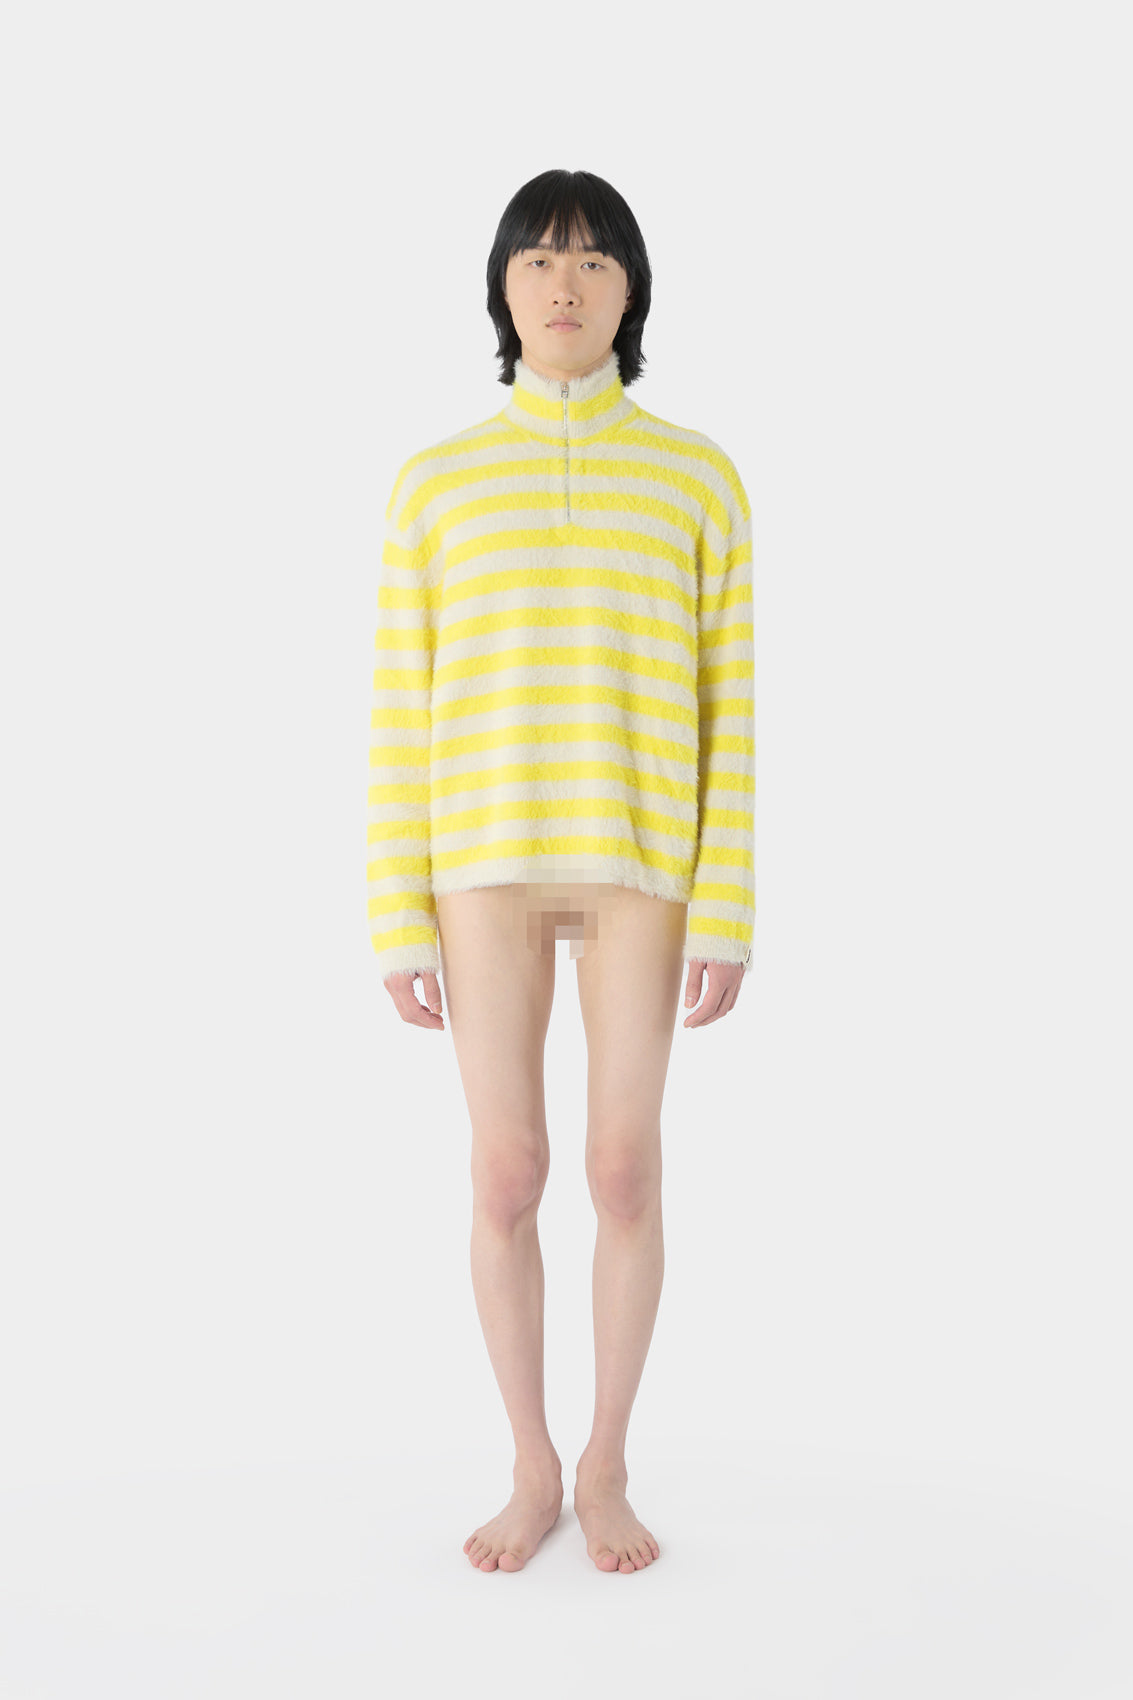 STREGATTO HIGH NECK LONG SLEEVE / beige & yellow stripes